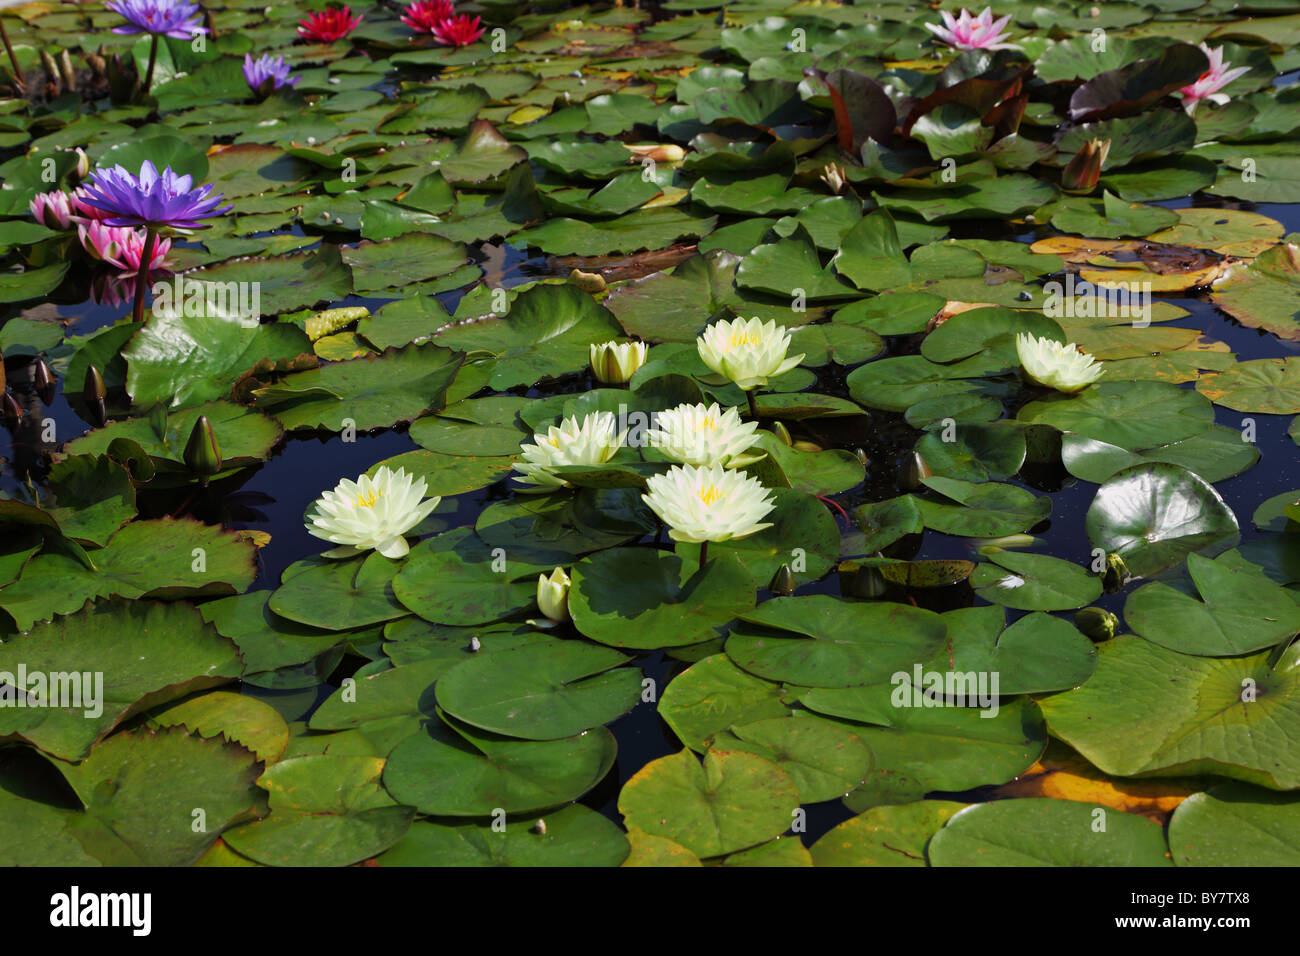 Large pond overgrown with flowering water lilies Stock Photo